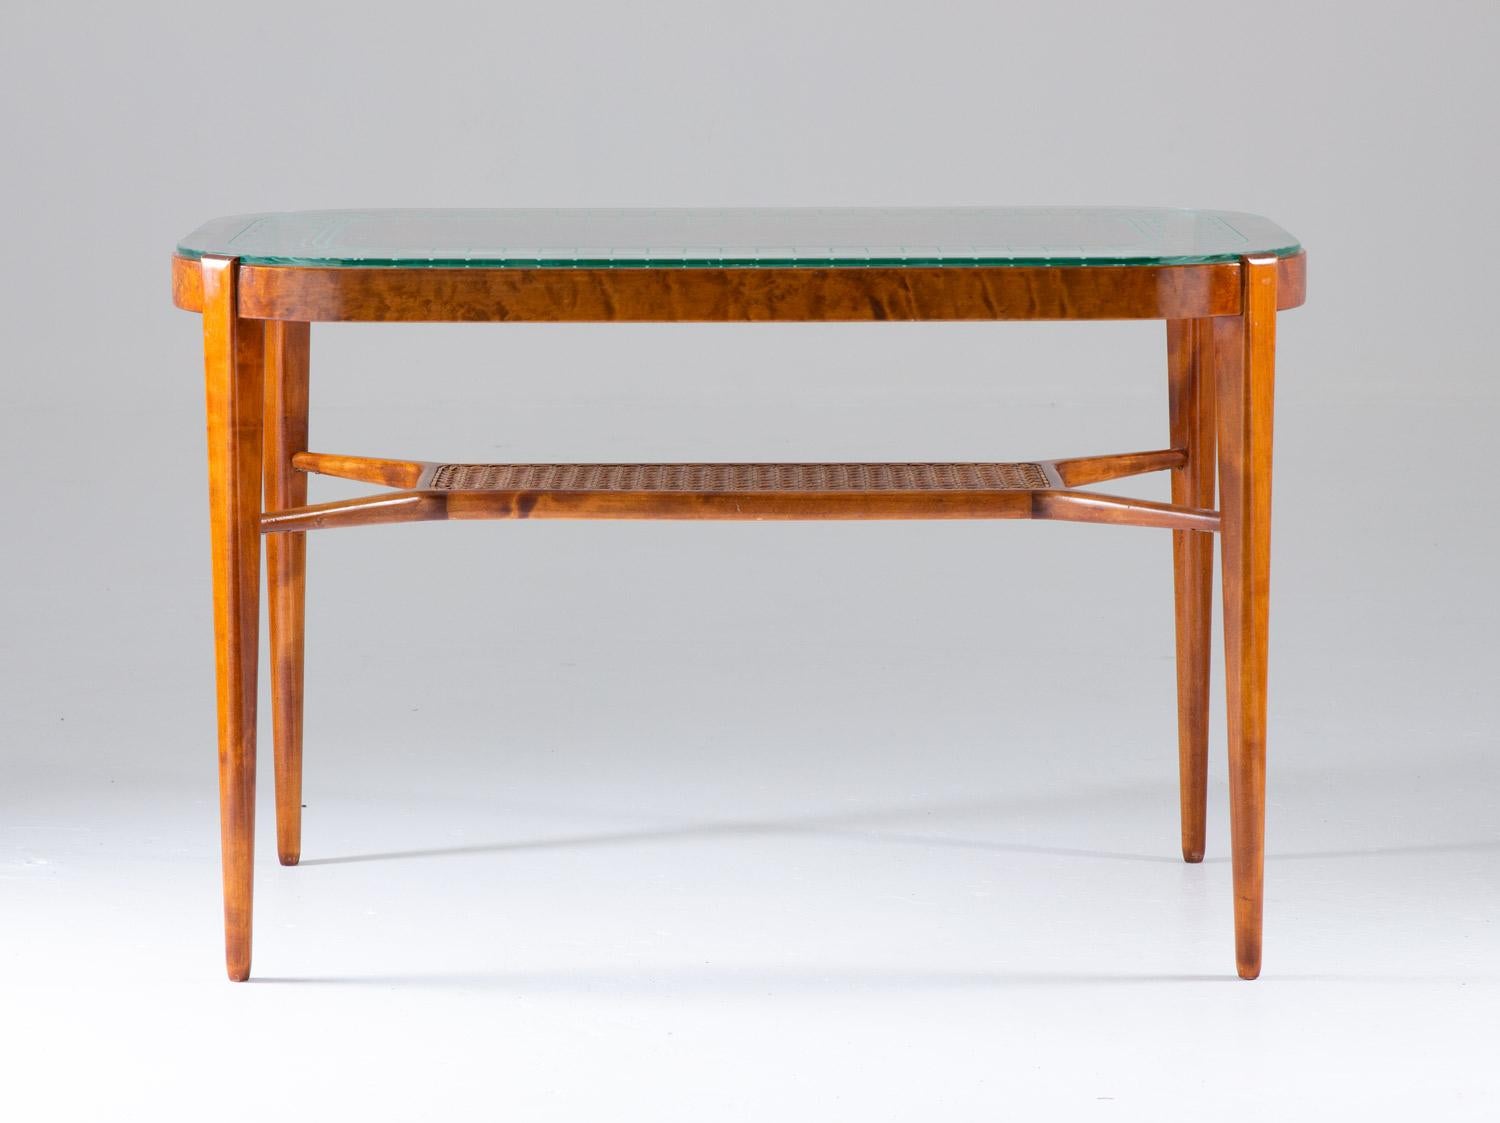 Swedish Modern Coffee Table in Birch, Glass and Rattan by Bodafors, 1940s In Good Condition For Sale In Karlstad, SE